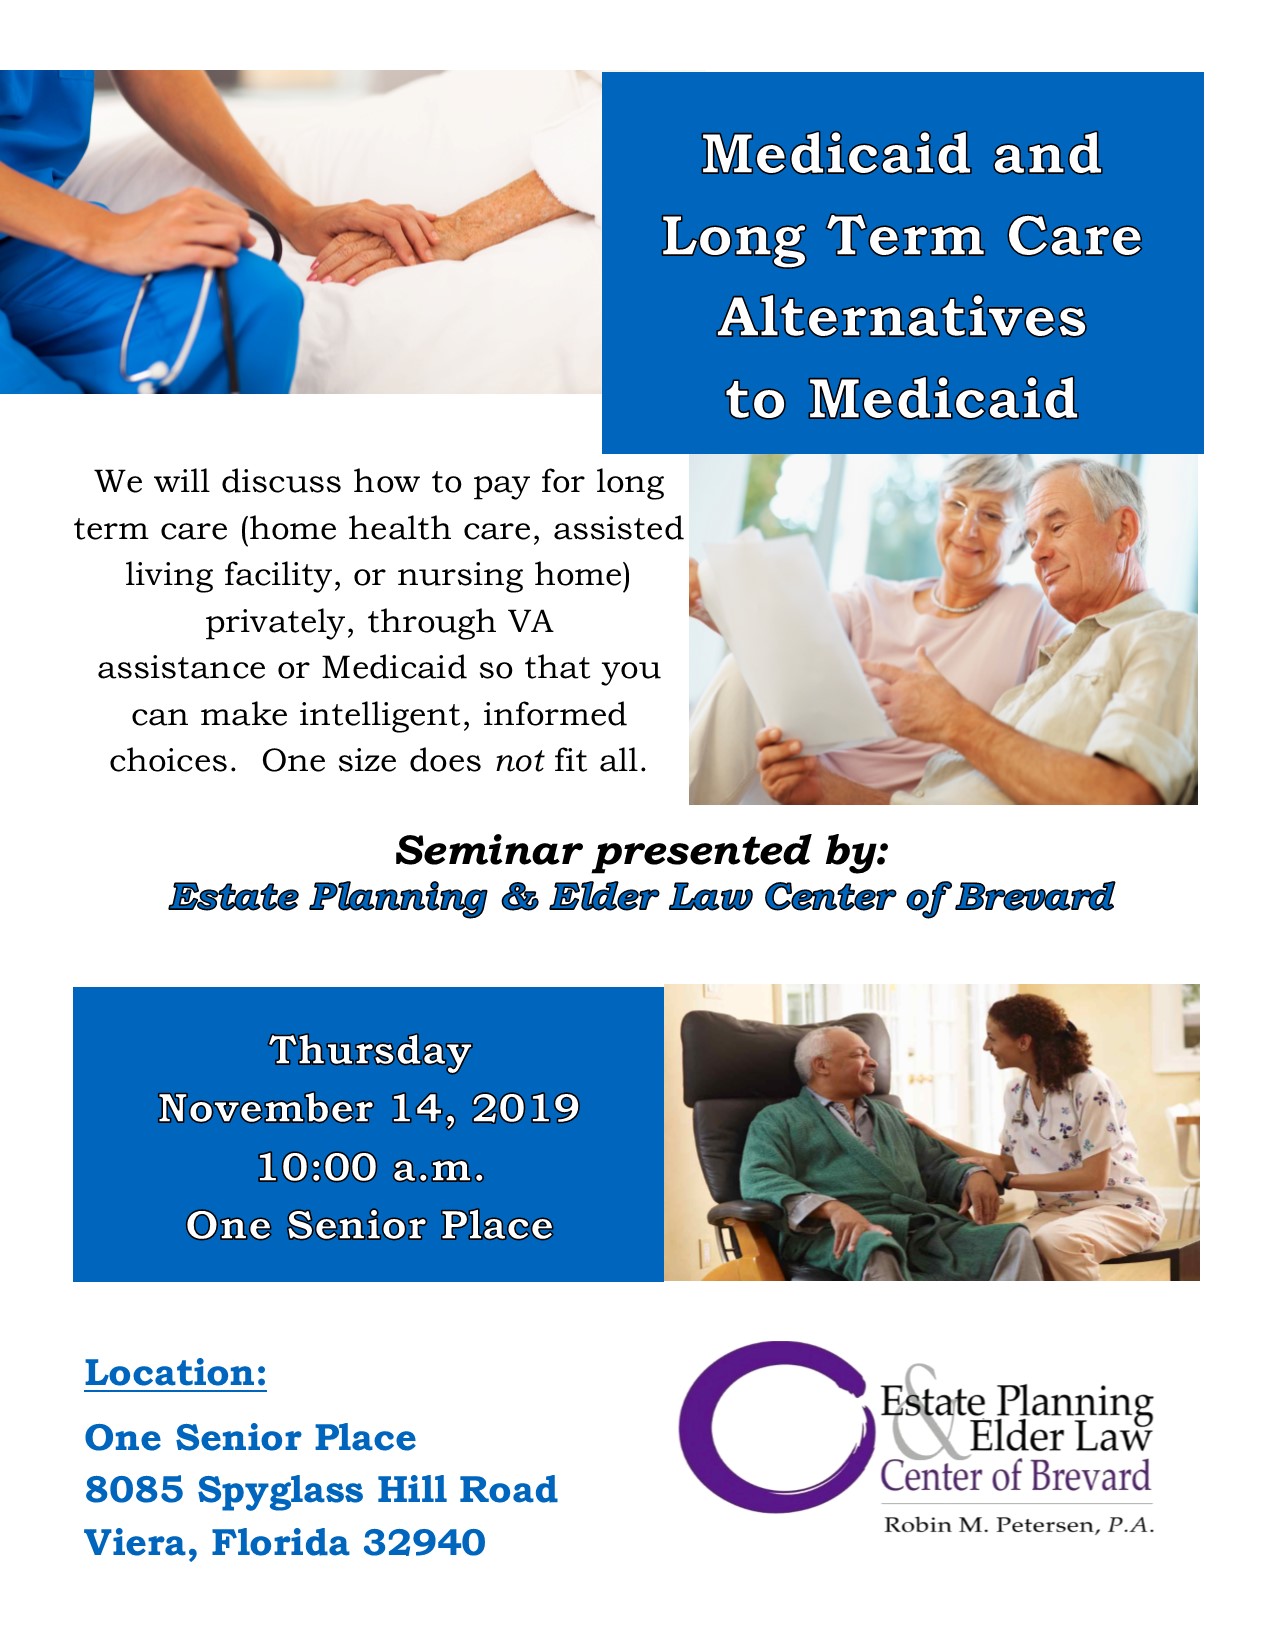 Medicaid and Long Term Care Alternatives to Medicaid Presented by Estate Planning and Elder Law Center of Brevard